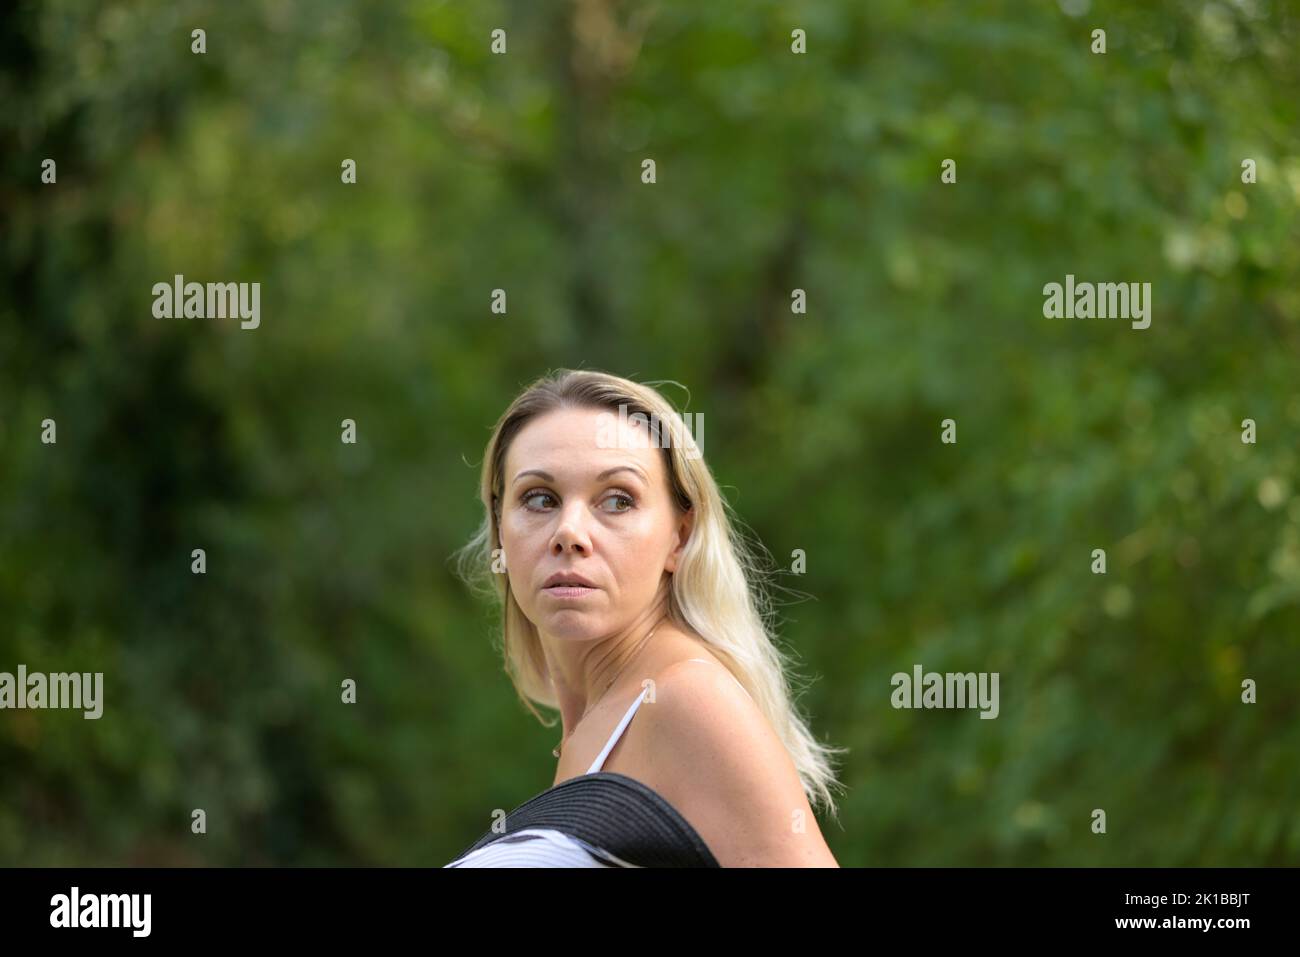 Attractive blond woman with a haunted expression, turns around and feels followed Stock Photo